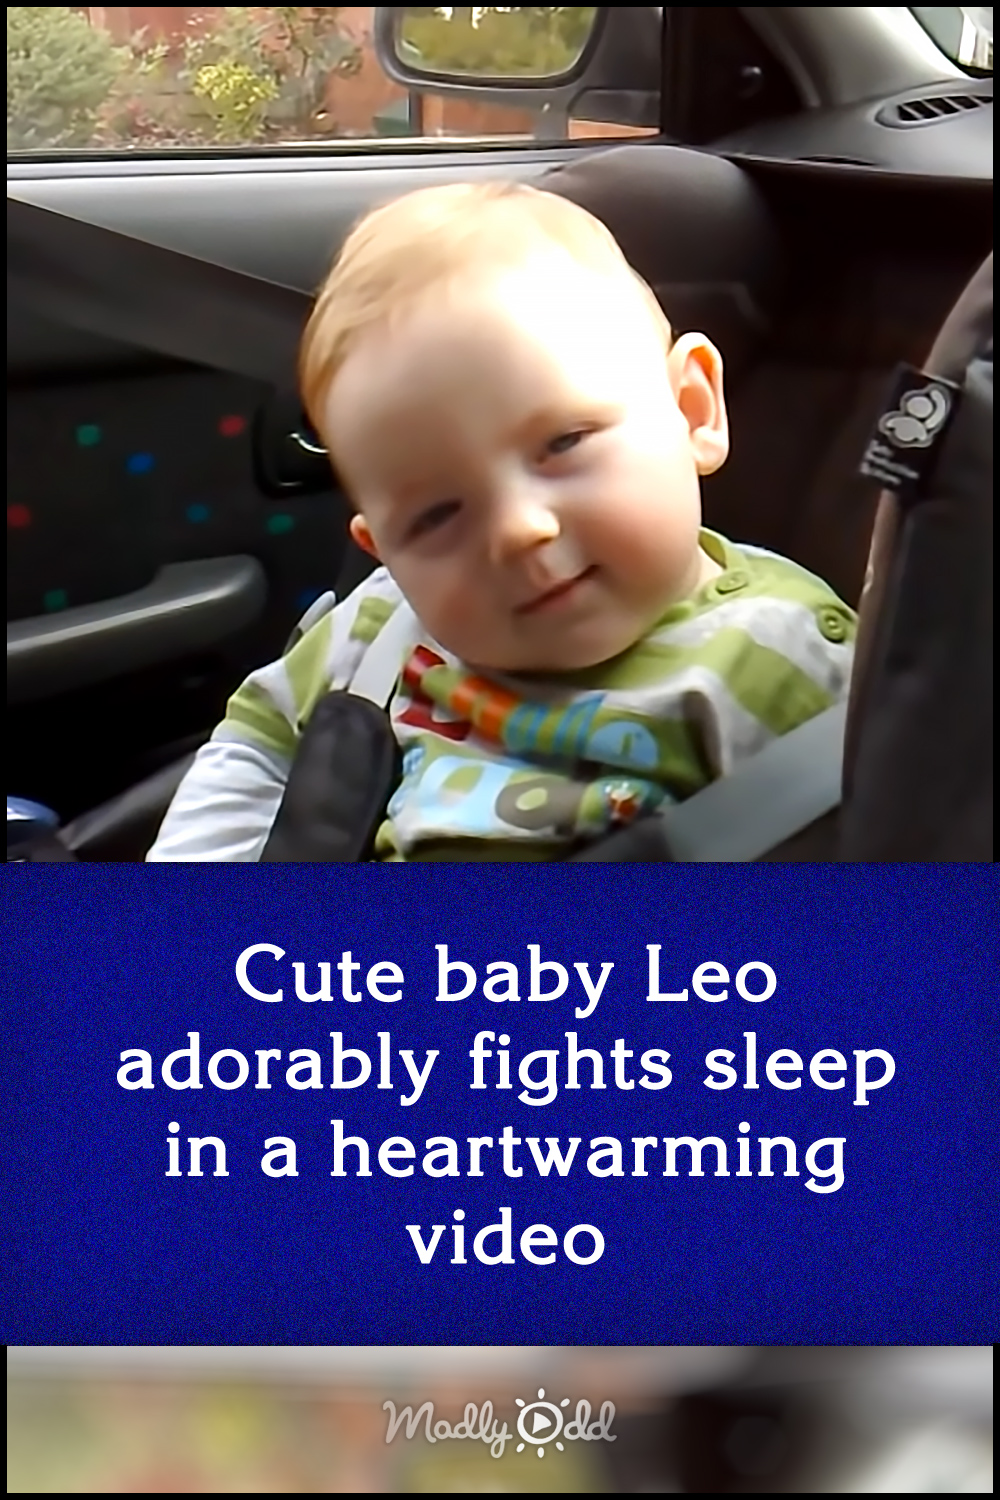 Cute baby Leo adorably fights sleep in a heartwarming video